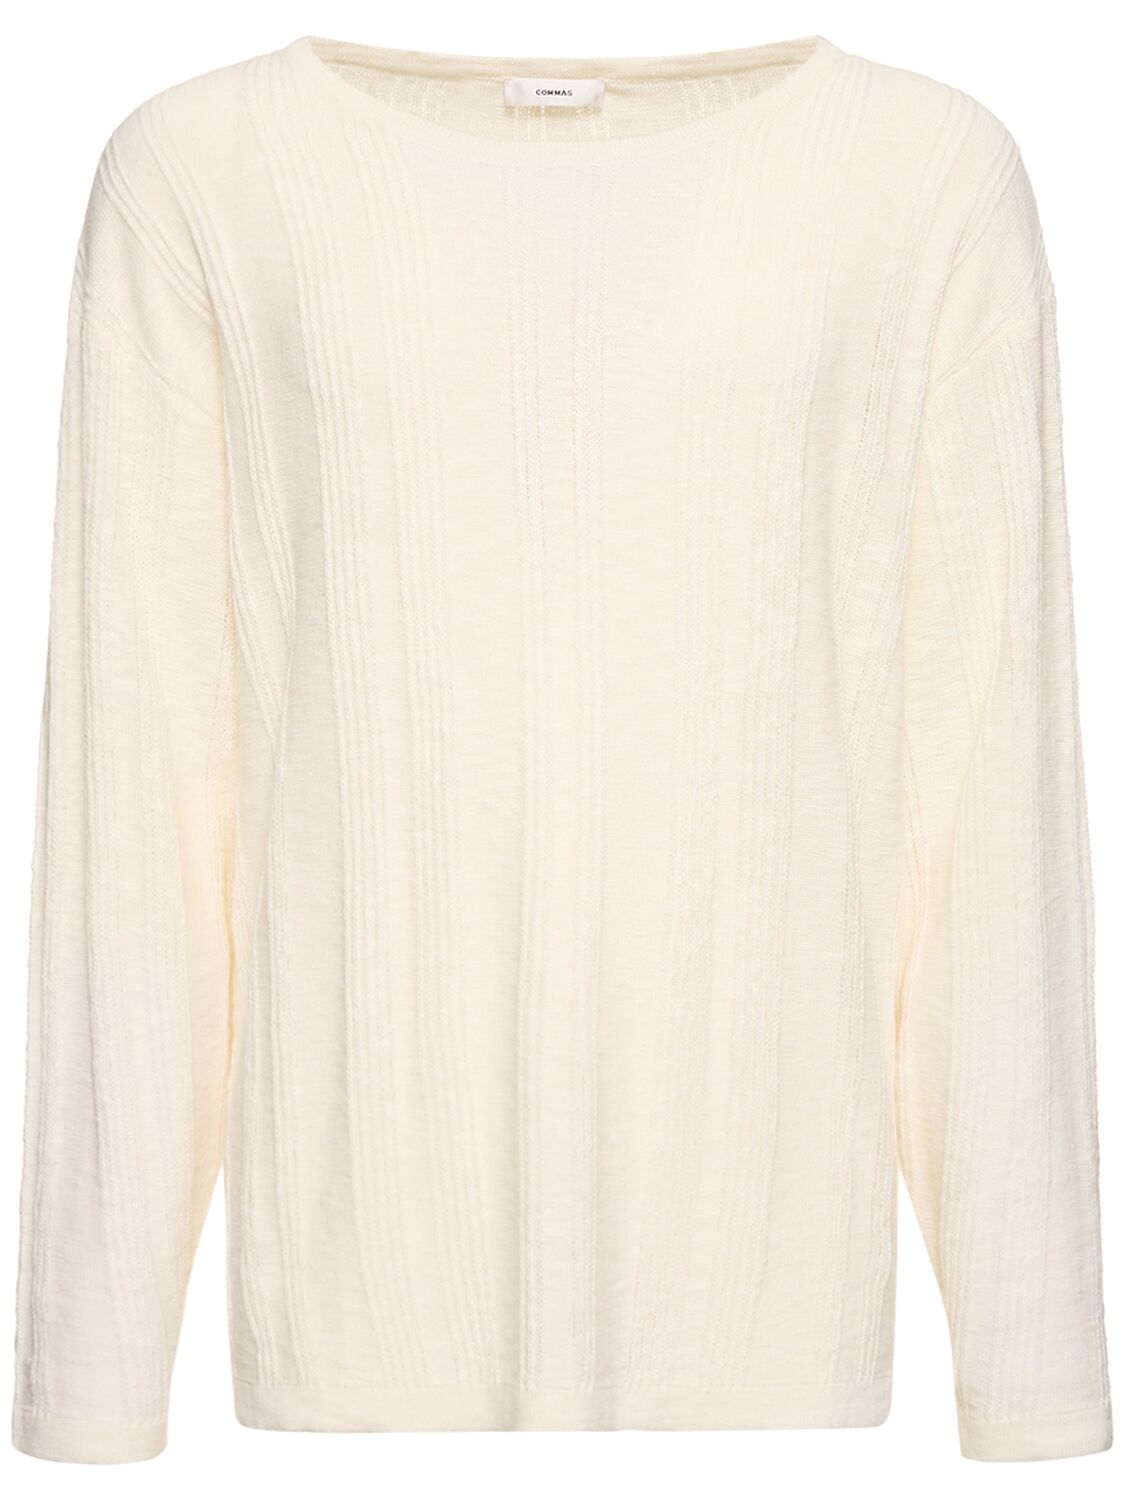 Image of Textured Knit Sweater